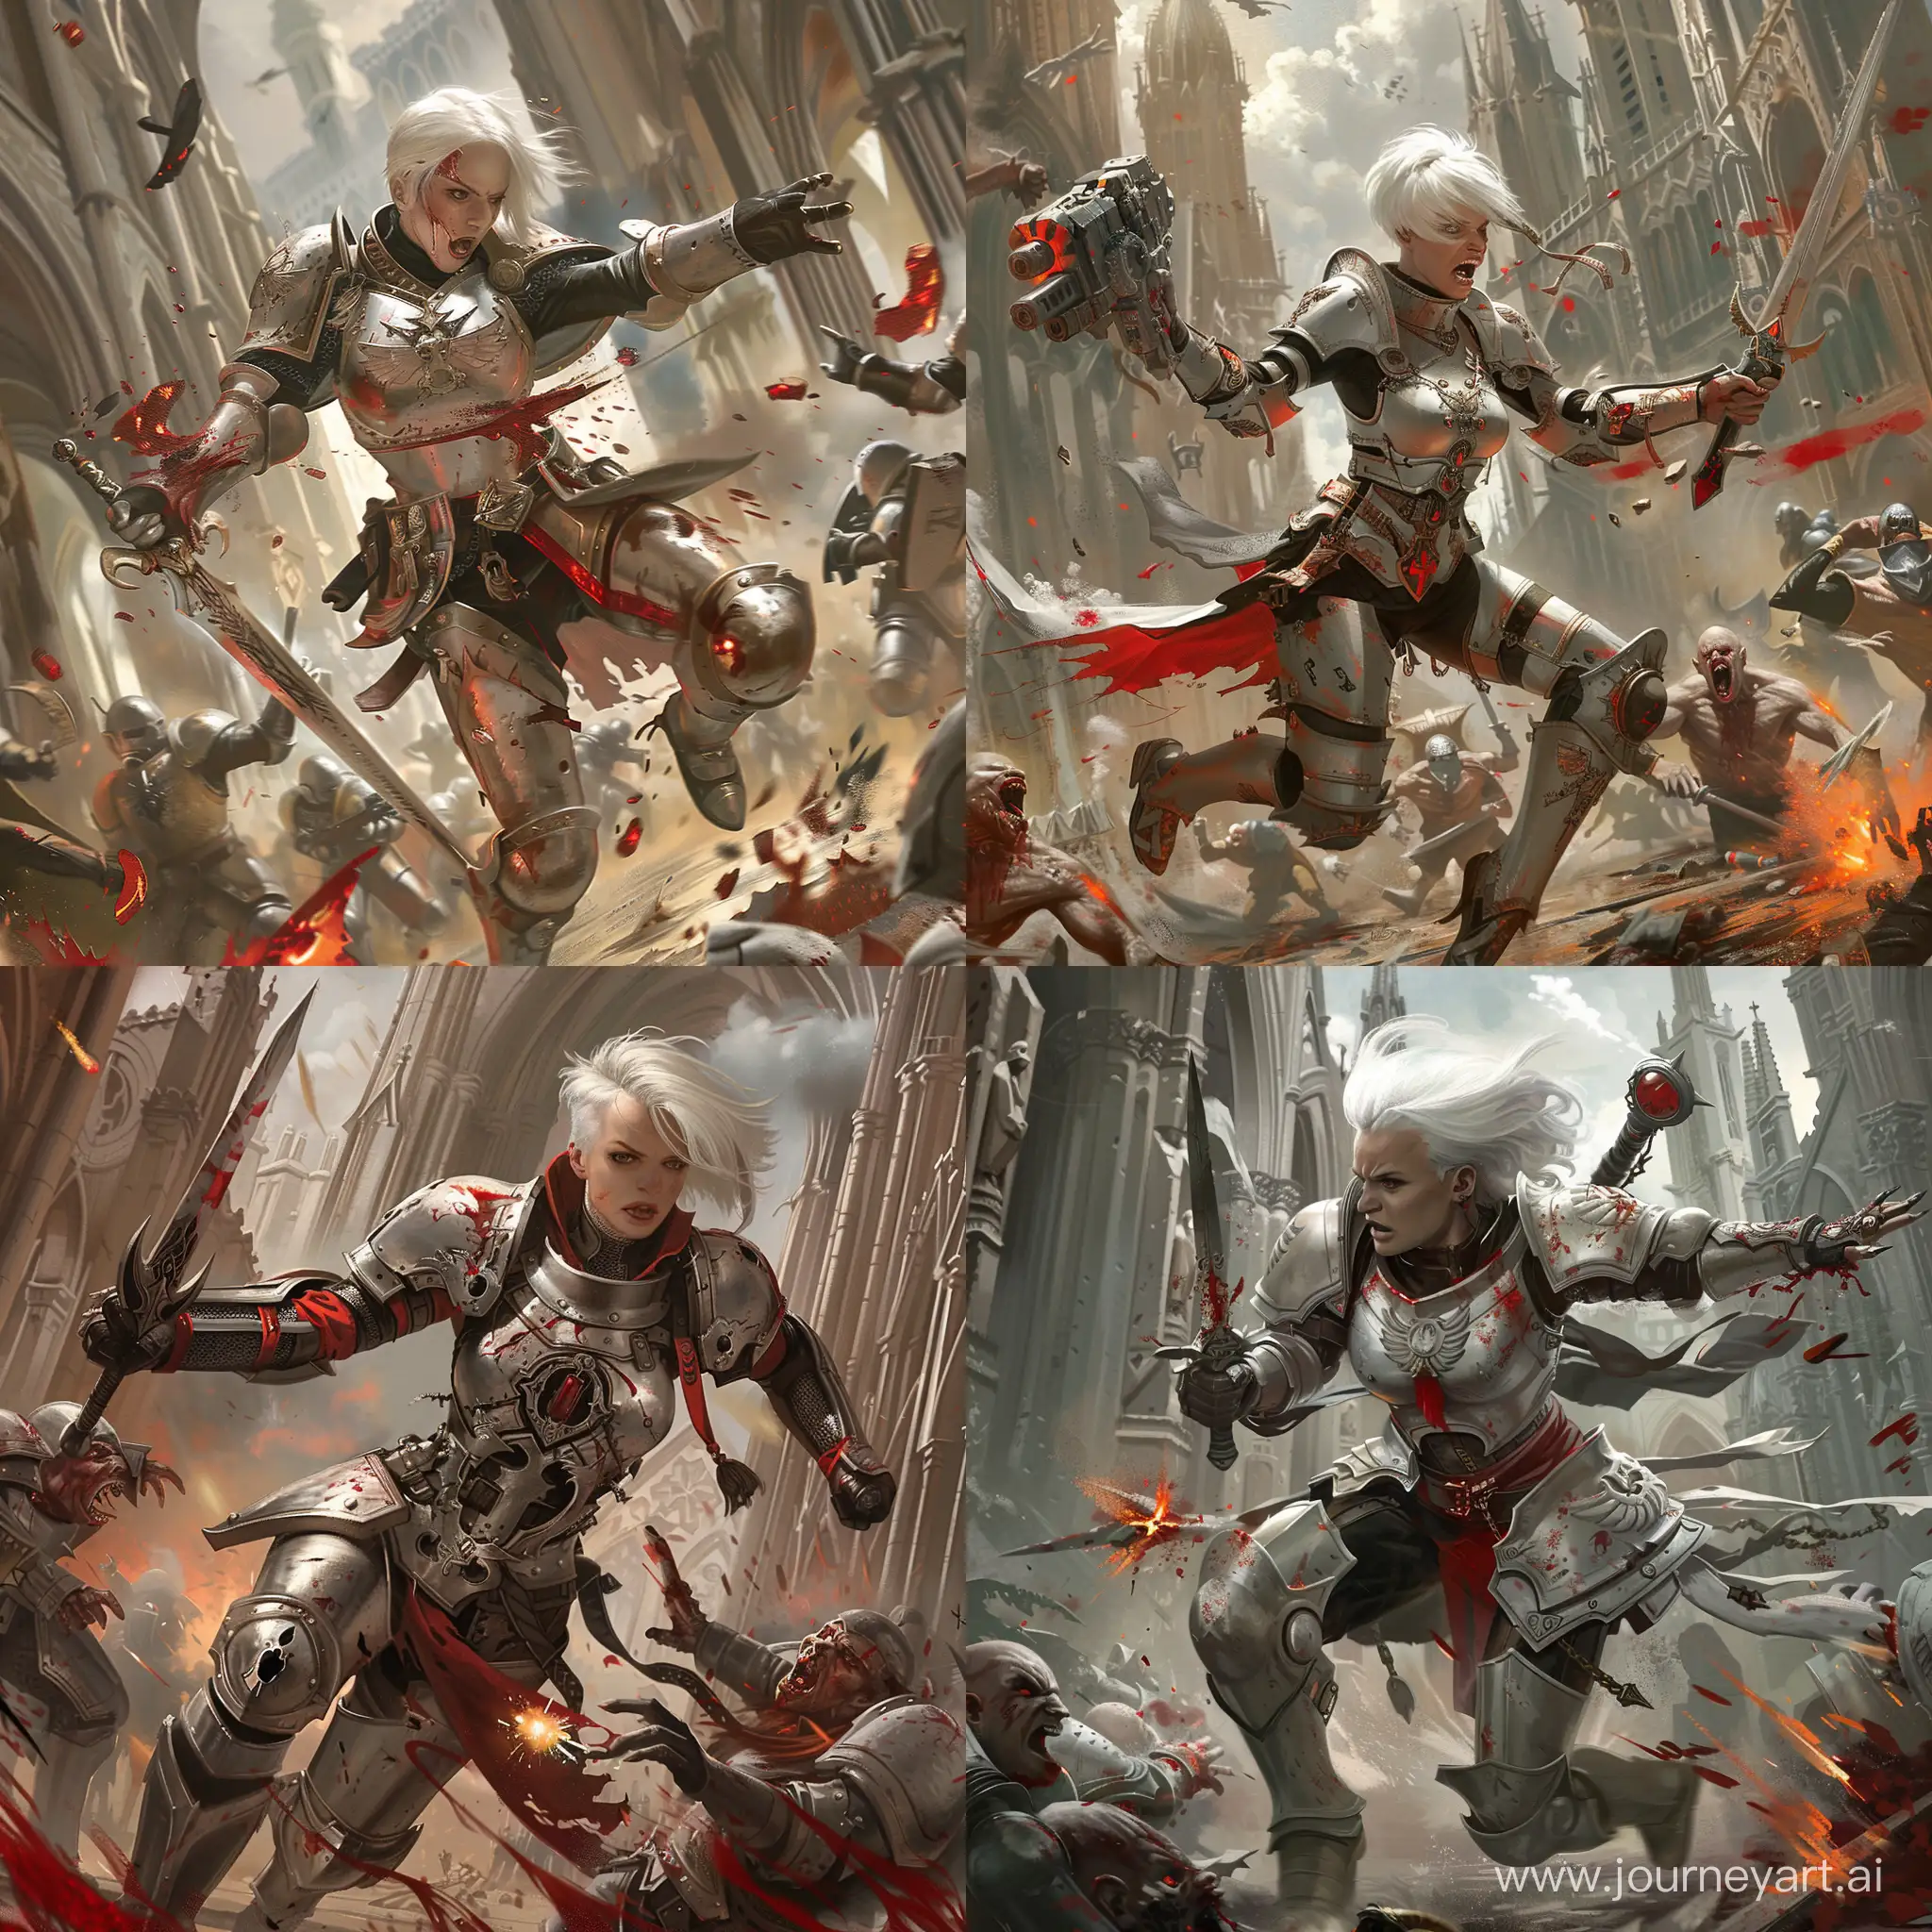 white and short haired adepta sororitas in gothic female siver armour with red elements, running and fighting with a sword and throwing granade, cathedral ruins in the background and dying warhammer cultists of chaos around her